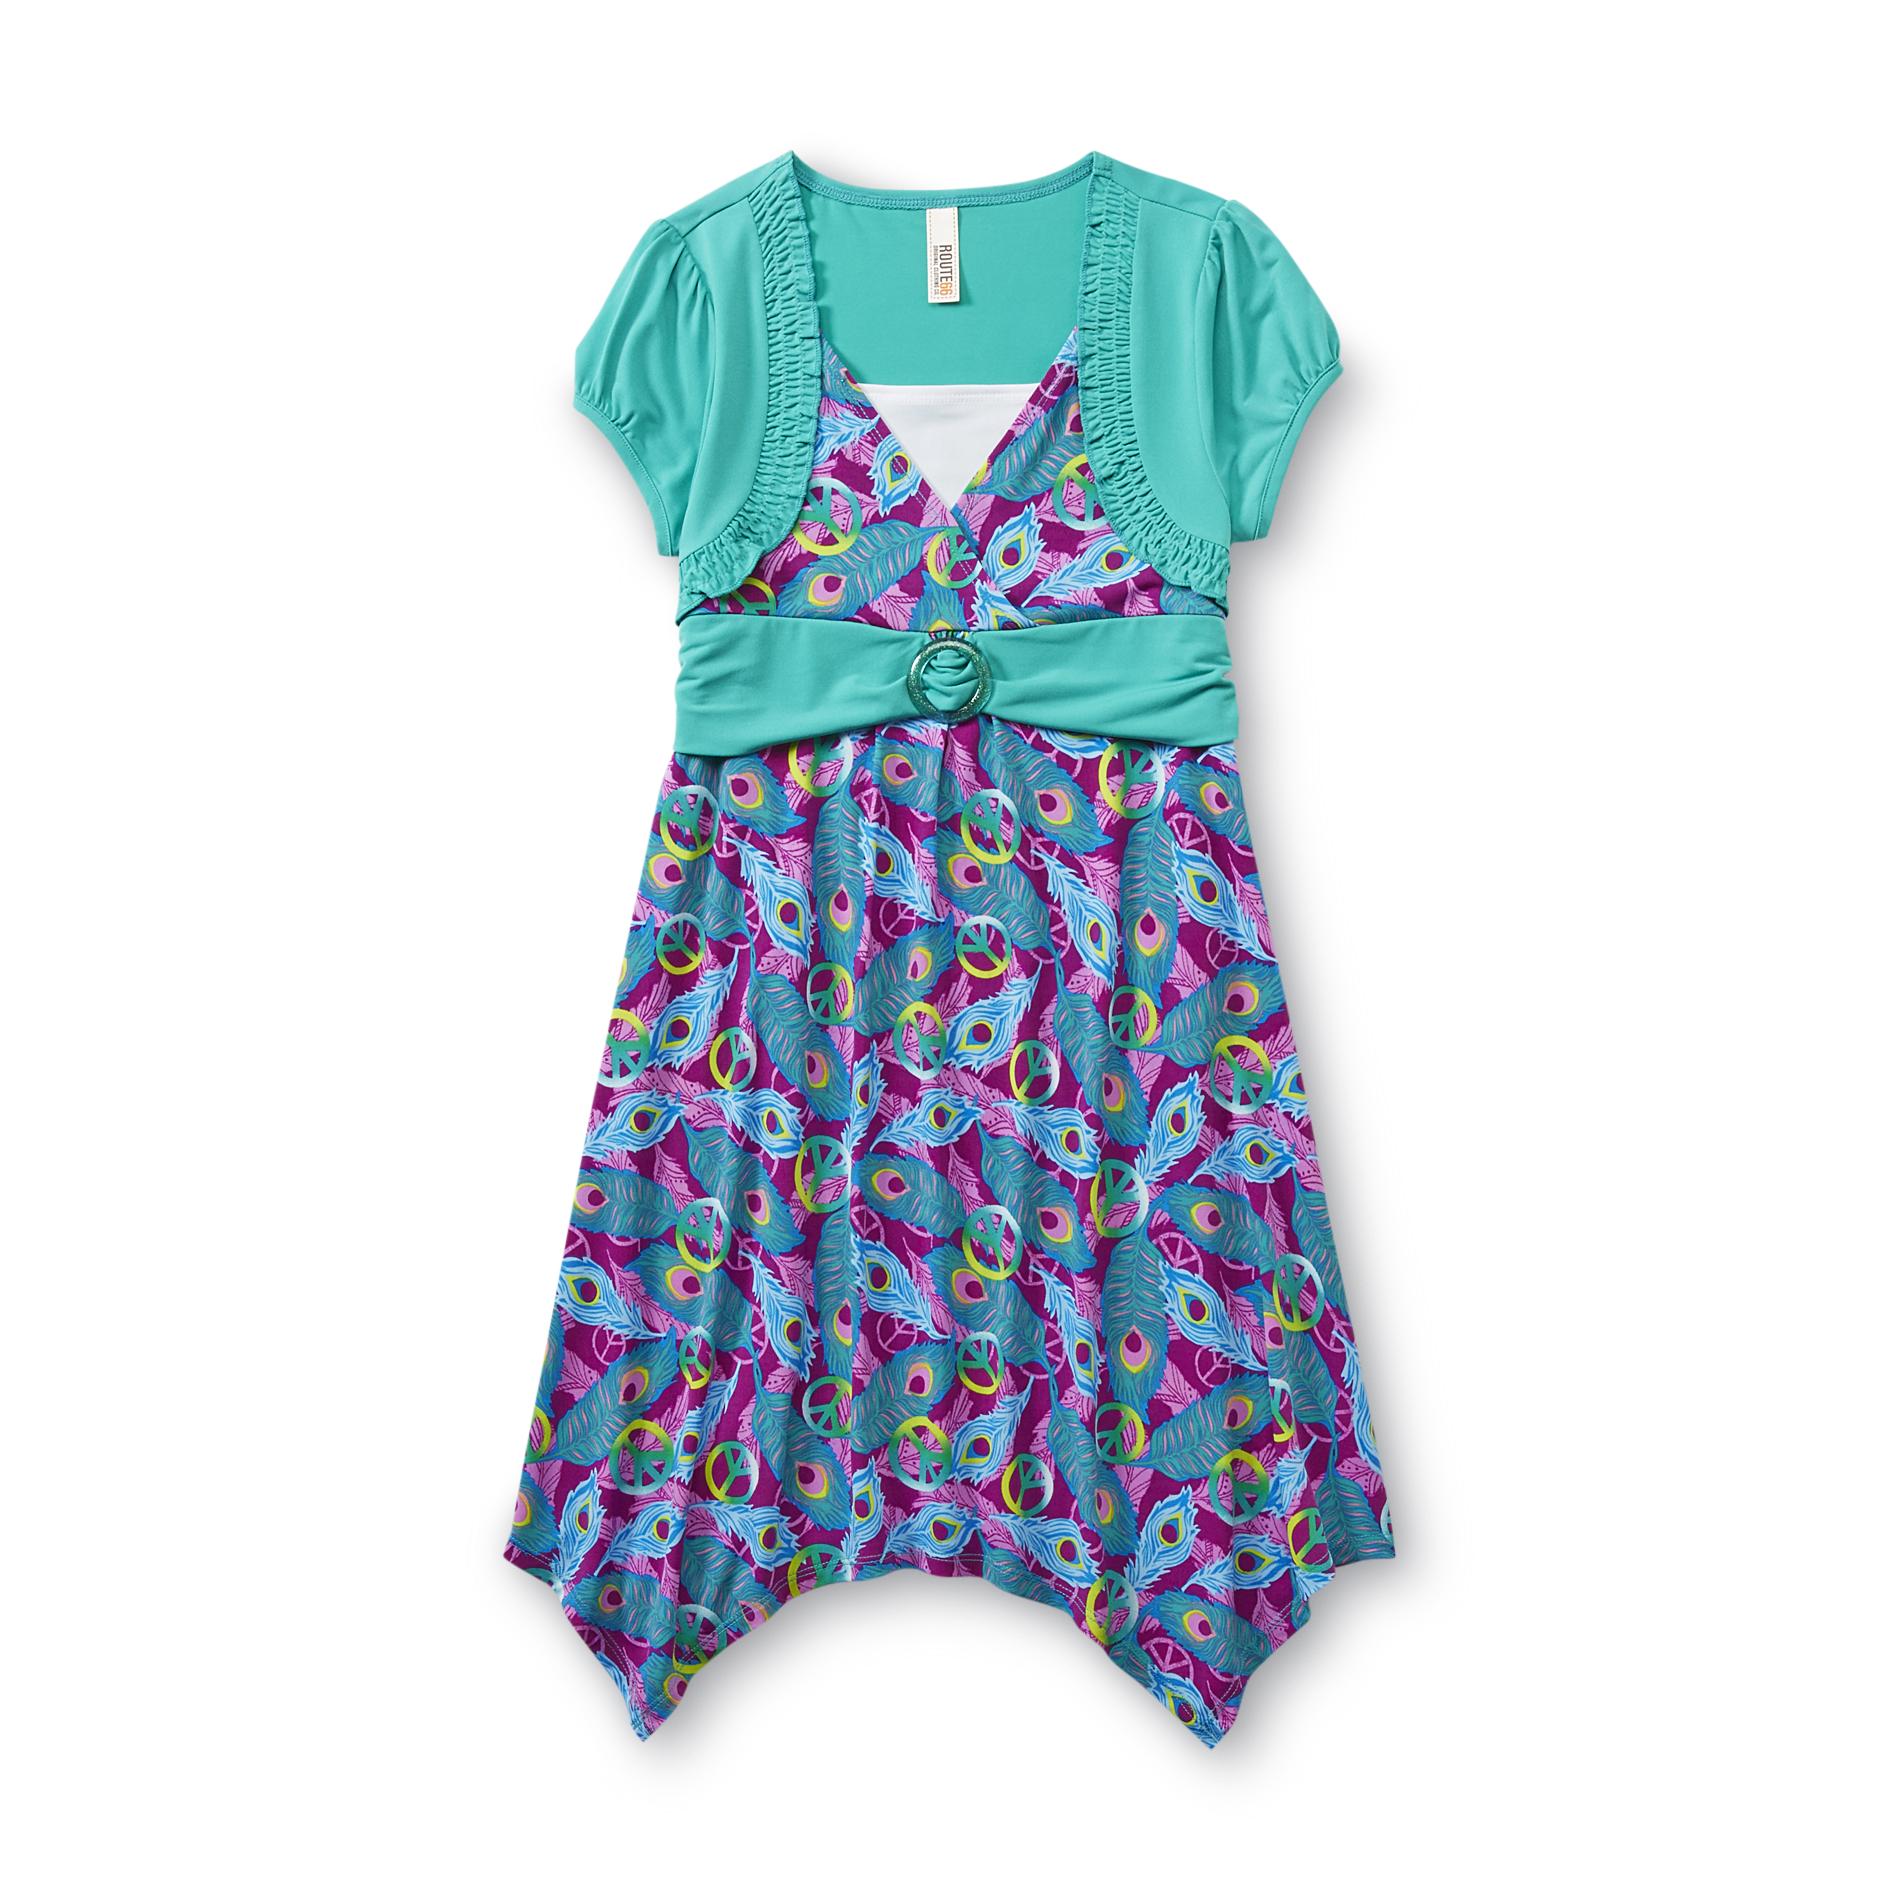 Route 66 Girl's Layered Look Dress - Peace Signs